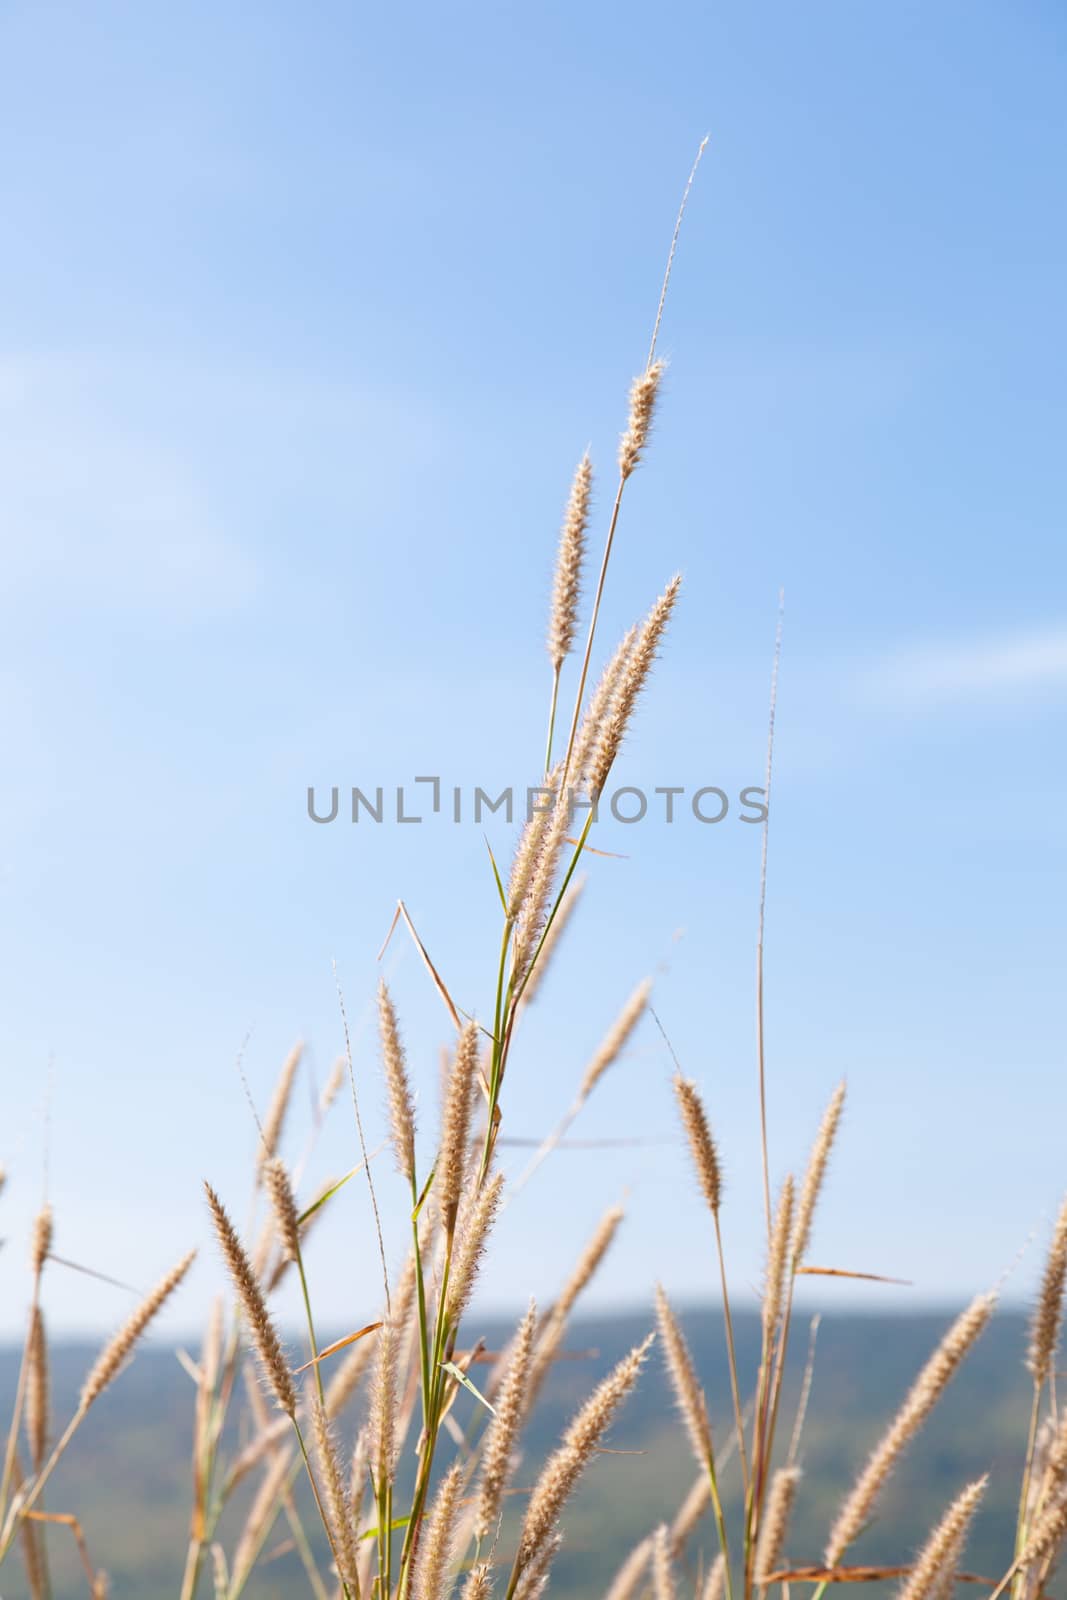 Flower of grass. Behind a clear sunny sky.